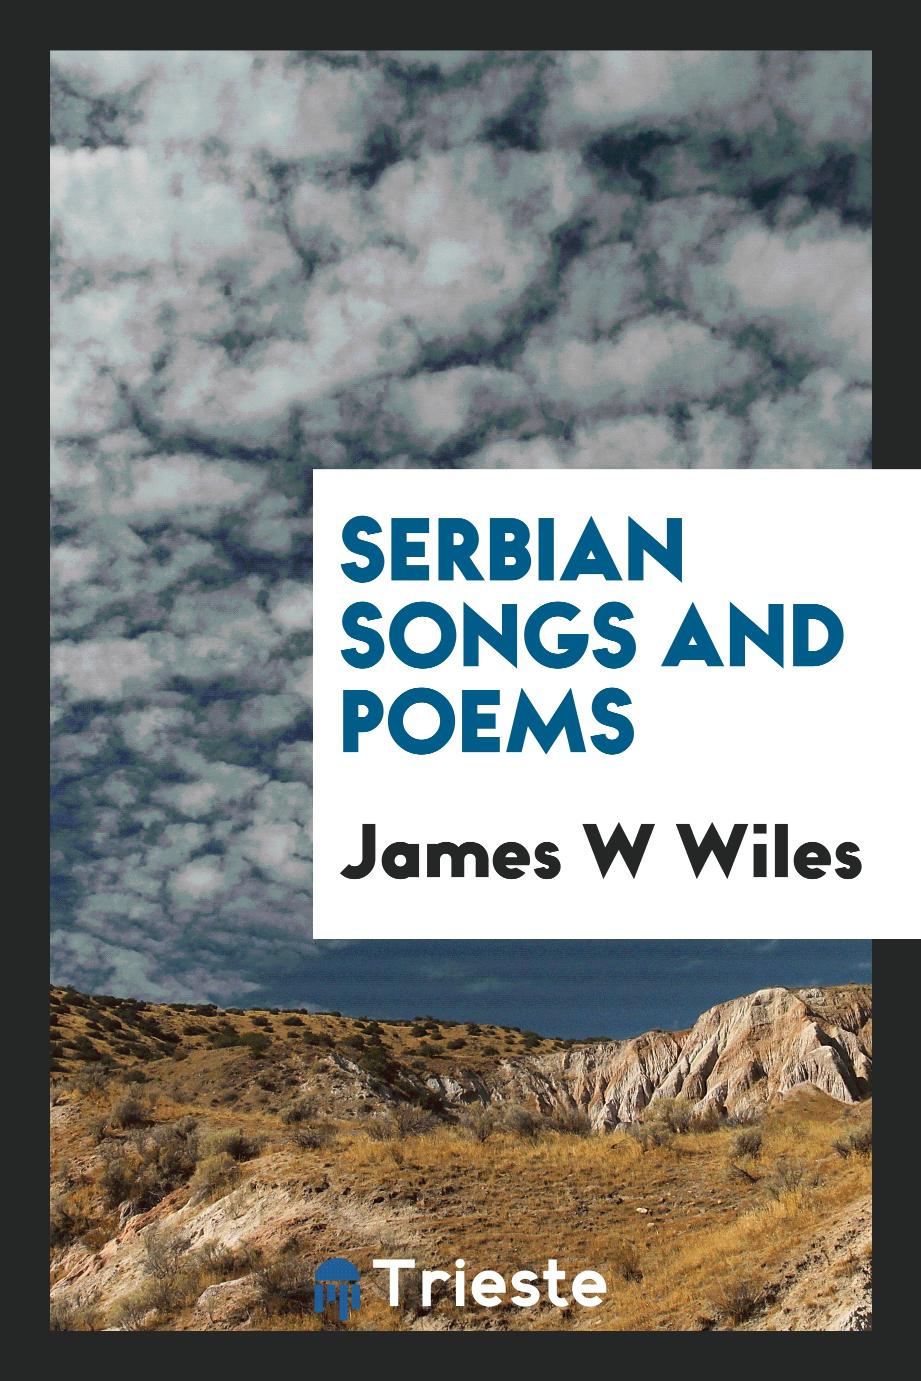 Serbian songs and poems